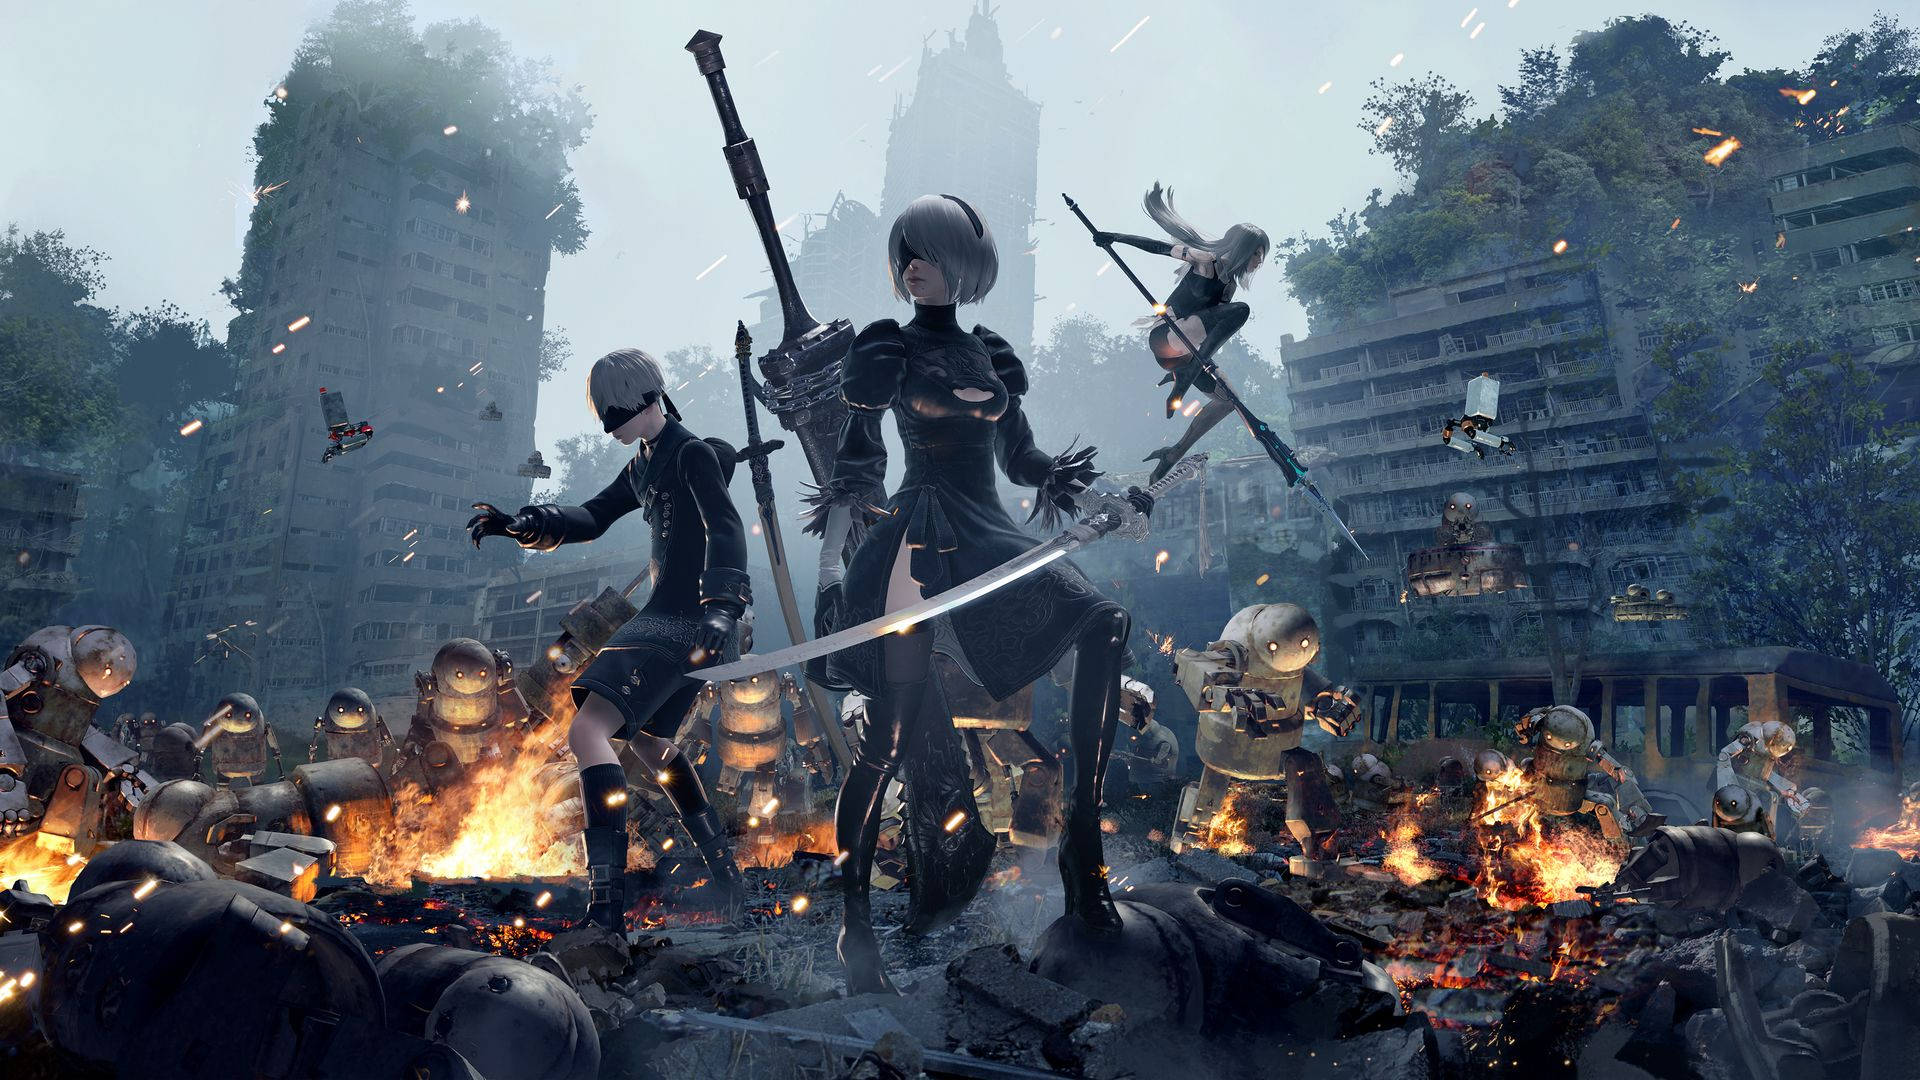 Adventurers 2B, 9S and A2 from Nier Automata Wallpaper